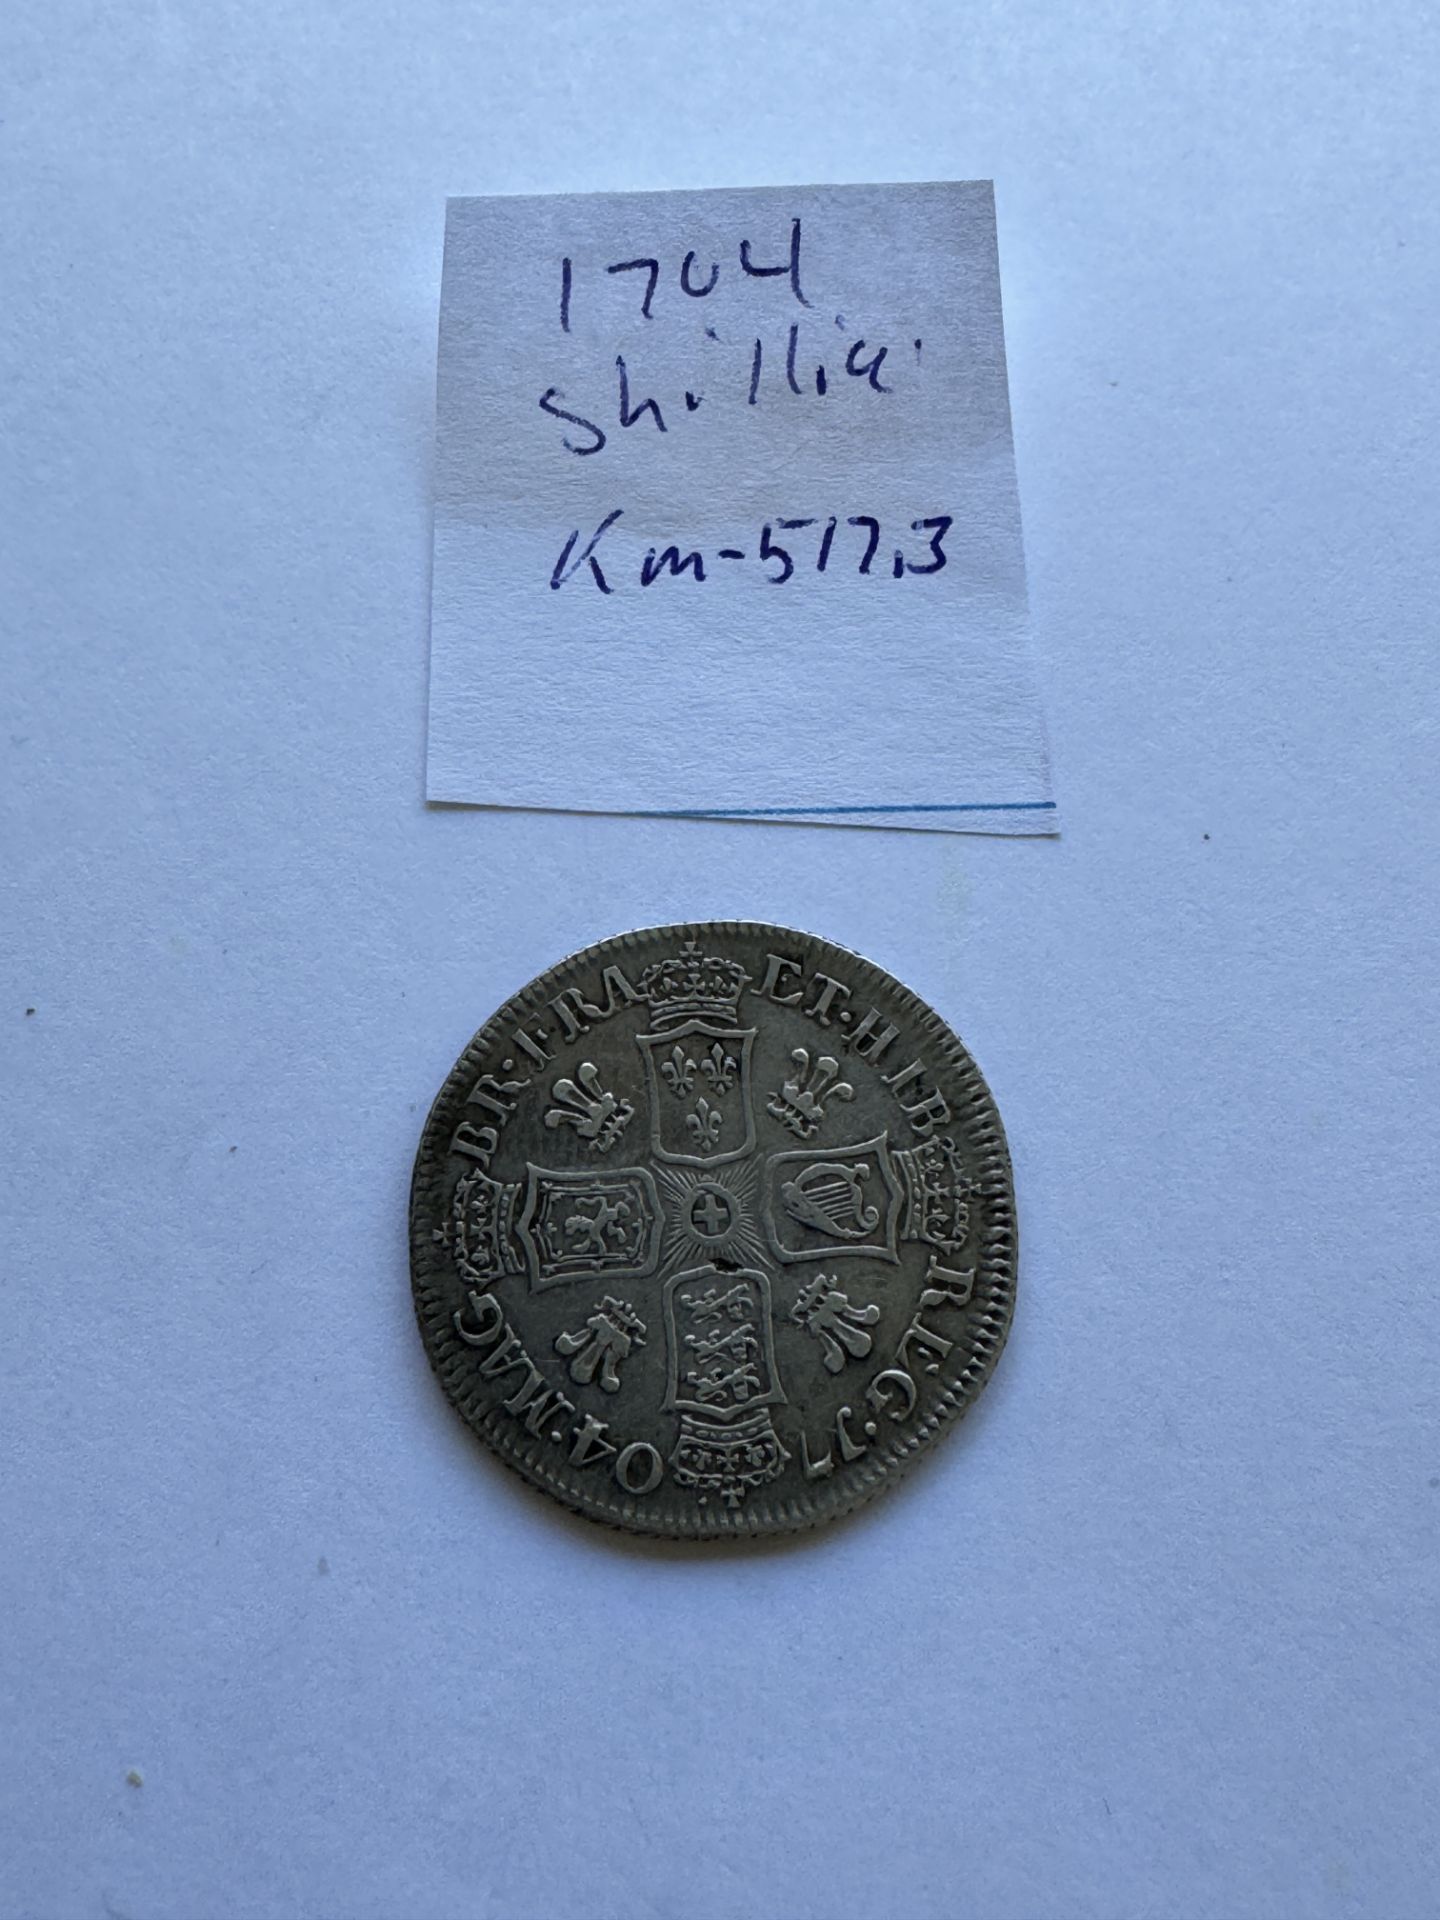 1704 QUEEN ANNE SHILLING COIN - Image 2 of 2